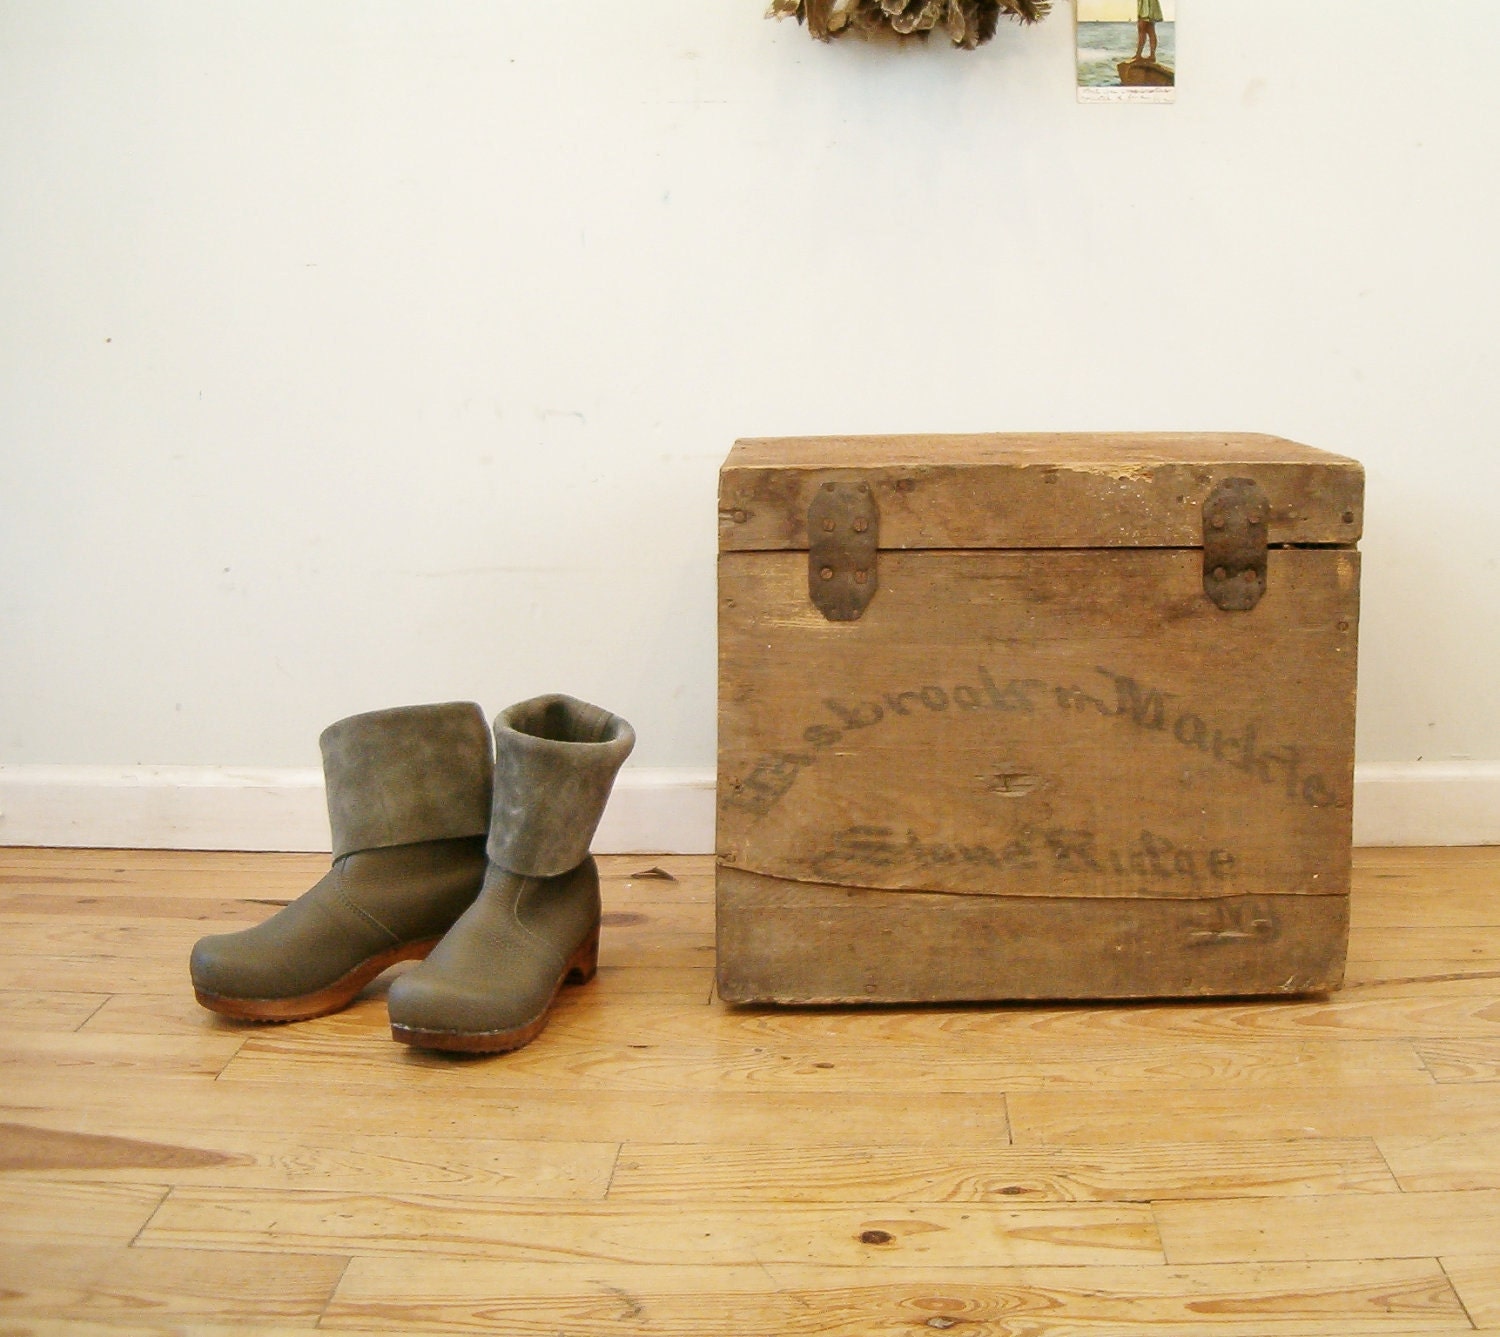 circa 1890 antique crate hand lettered shipping box